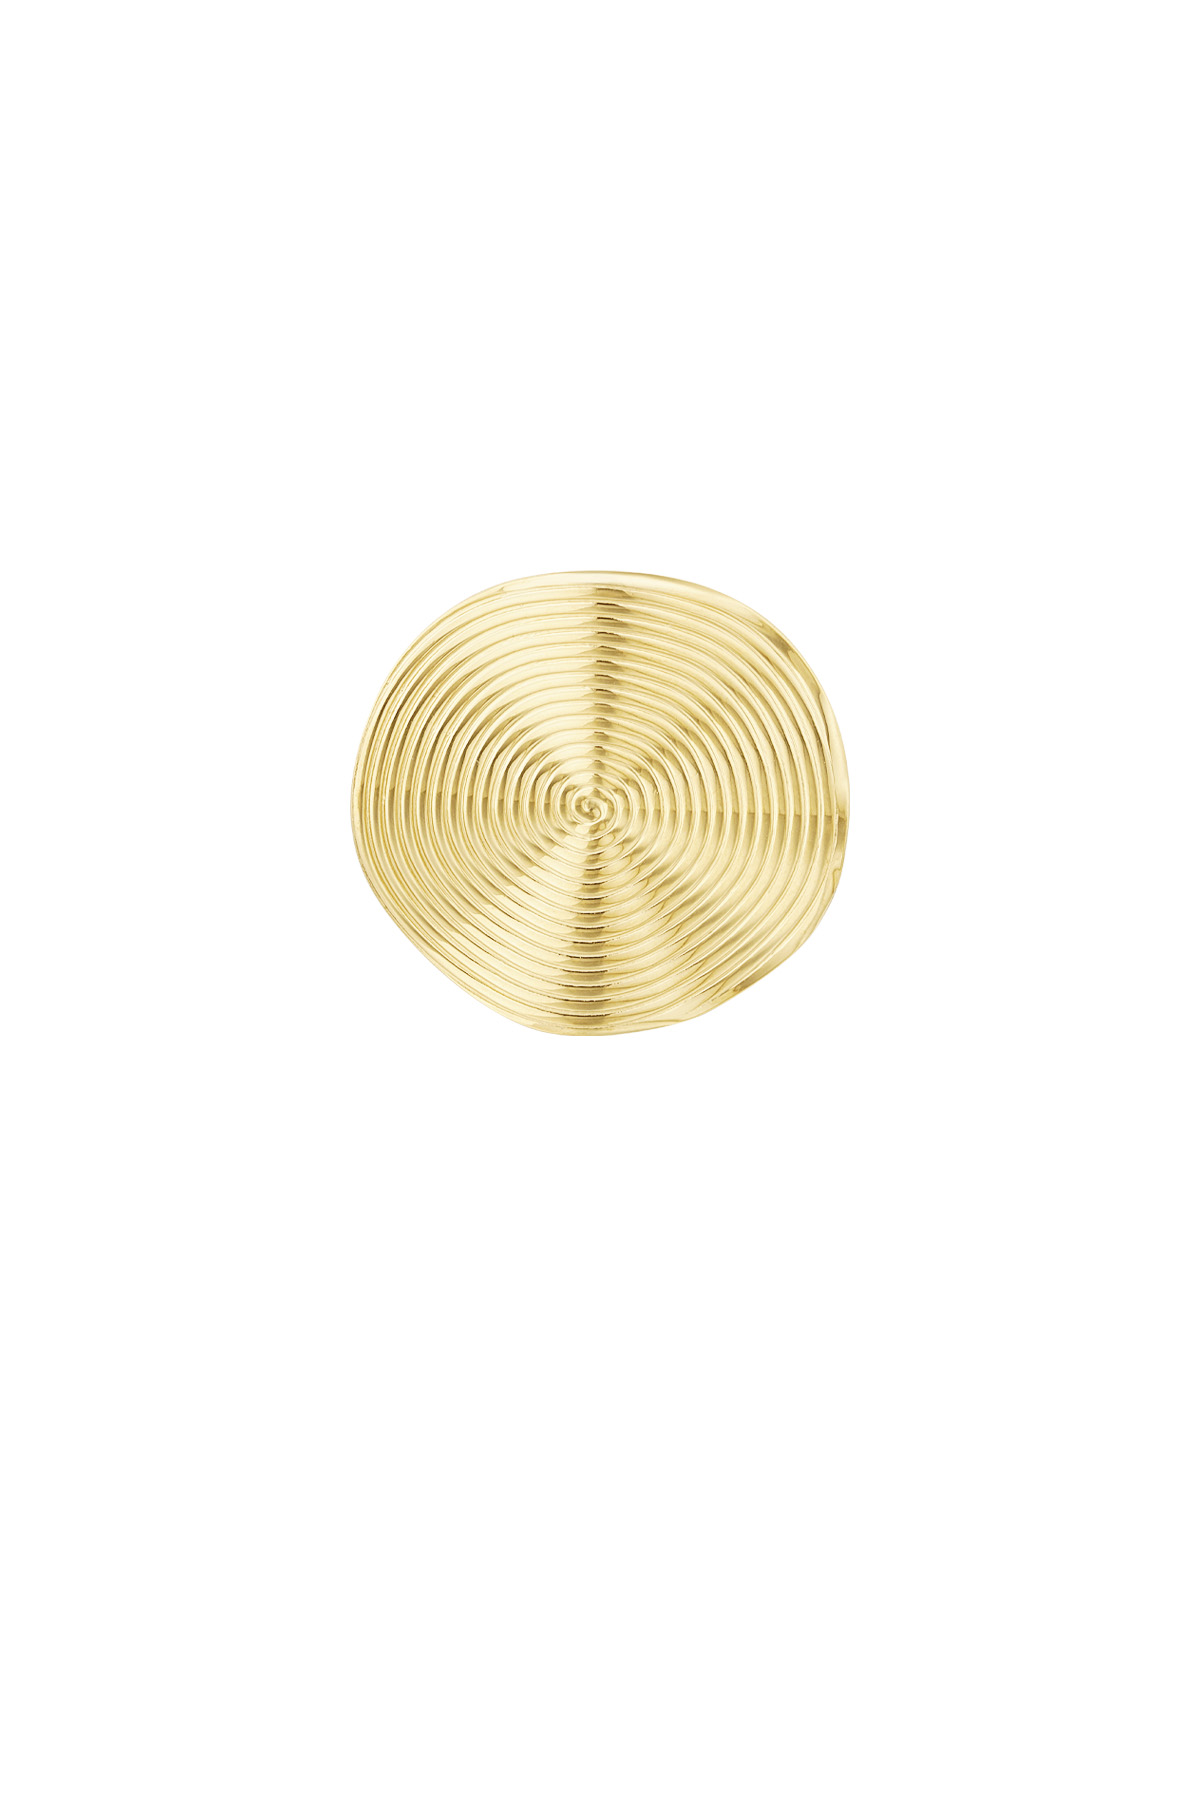 Ring with round pattern - gold h5 